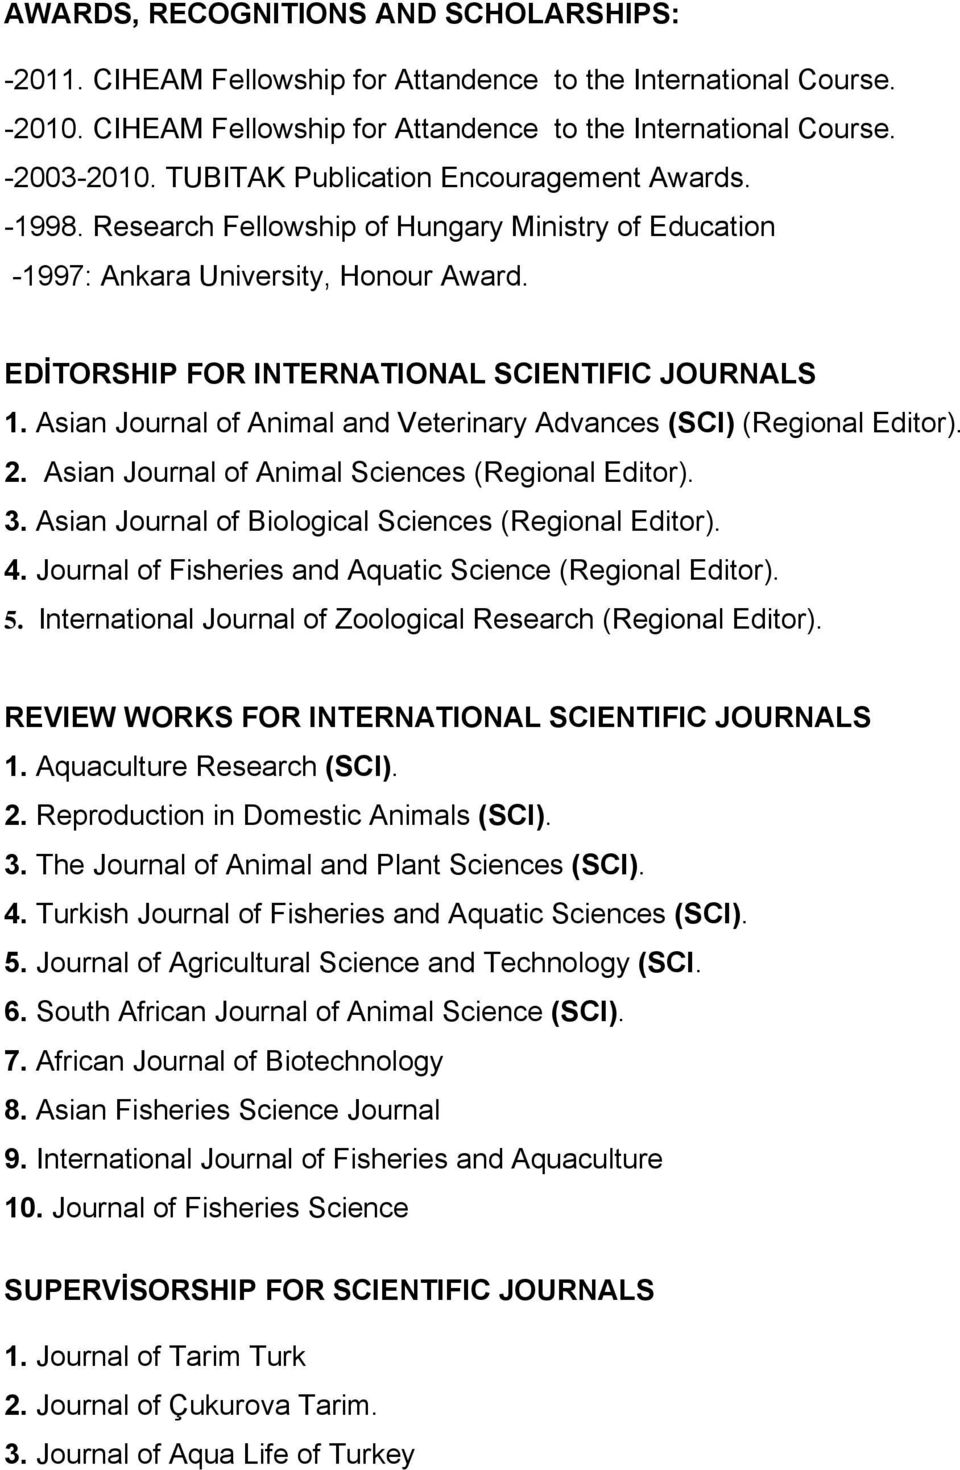 Asian Journal of Animal and Veterinary Advances (SCI) (Regional Editor). 2. Asian Journal of Animal Sciences (Regional Editor). 3. Asian Journal of Biological Sciences (Regional Editor). 4.